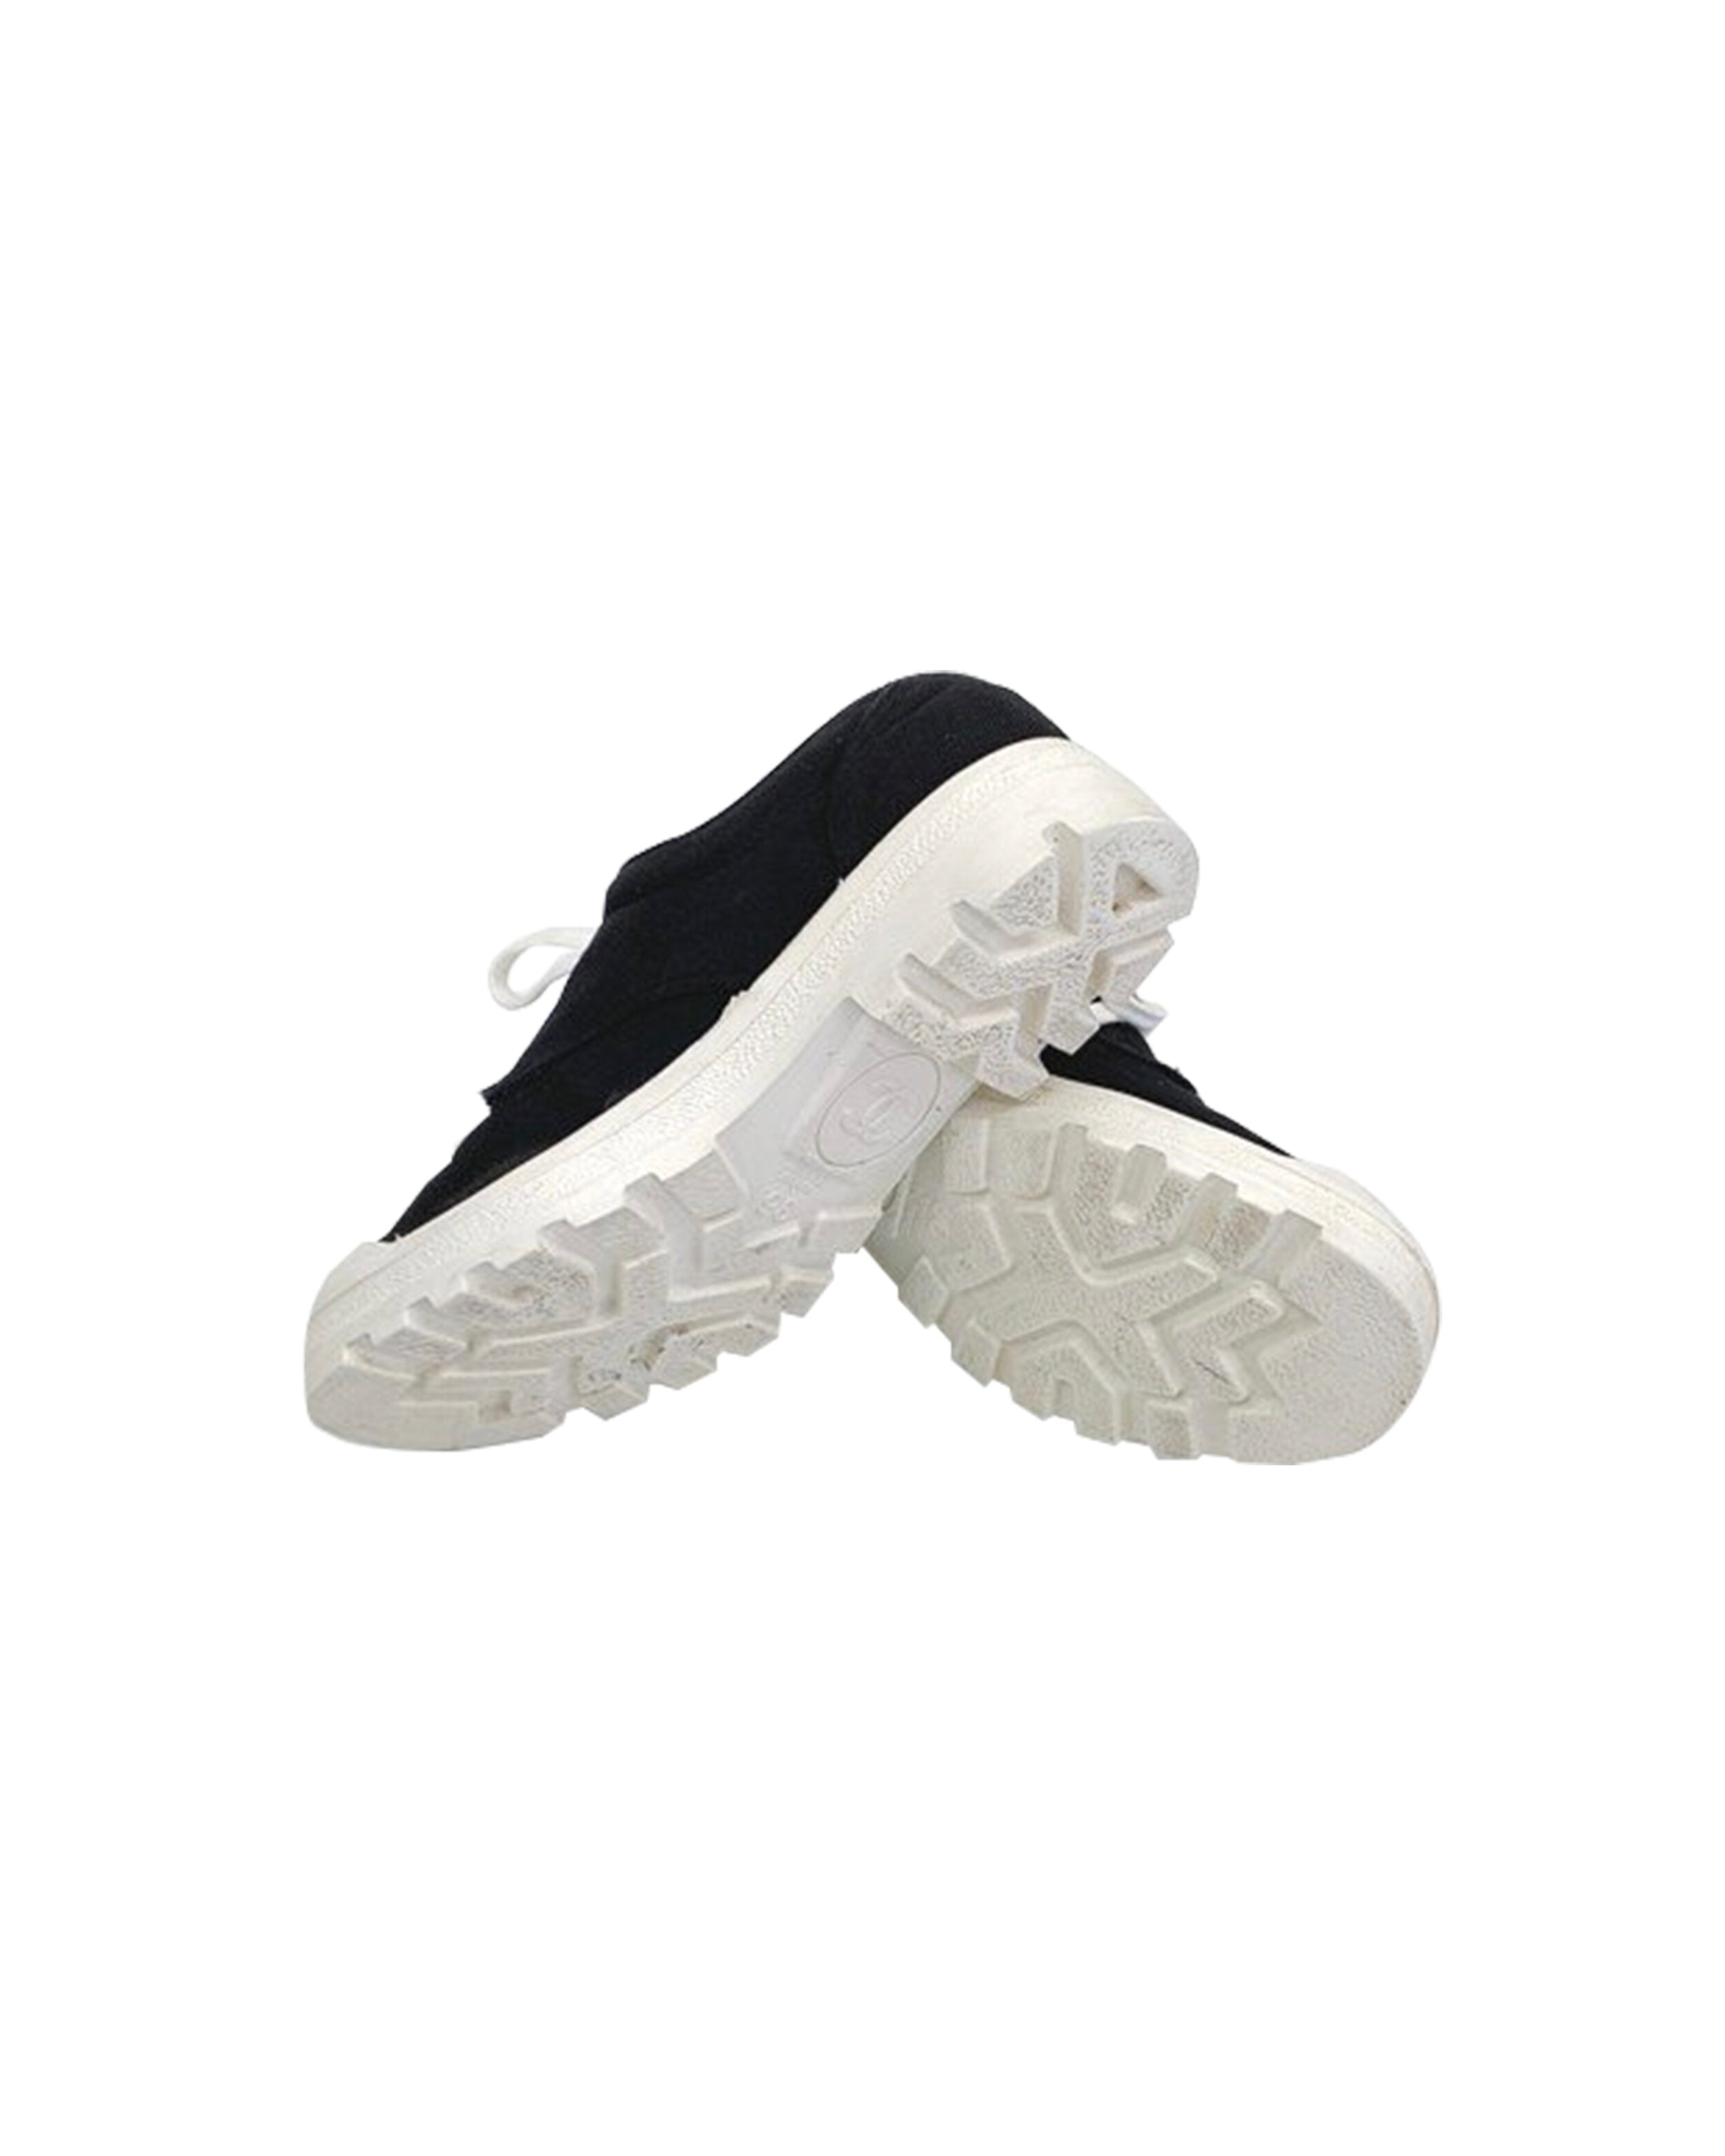 Chanel 2000s Cotton CC Black and White Sneakers